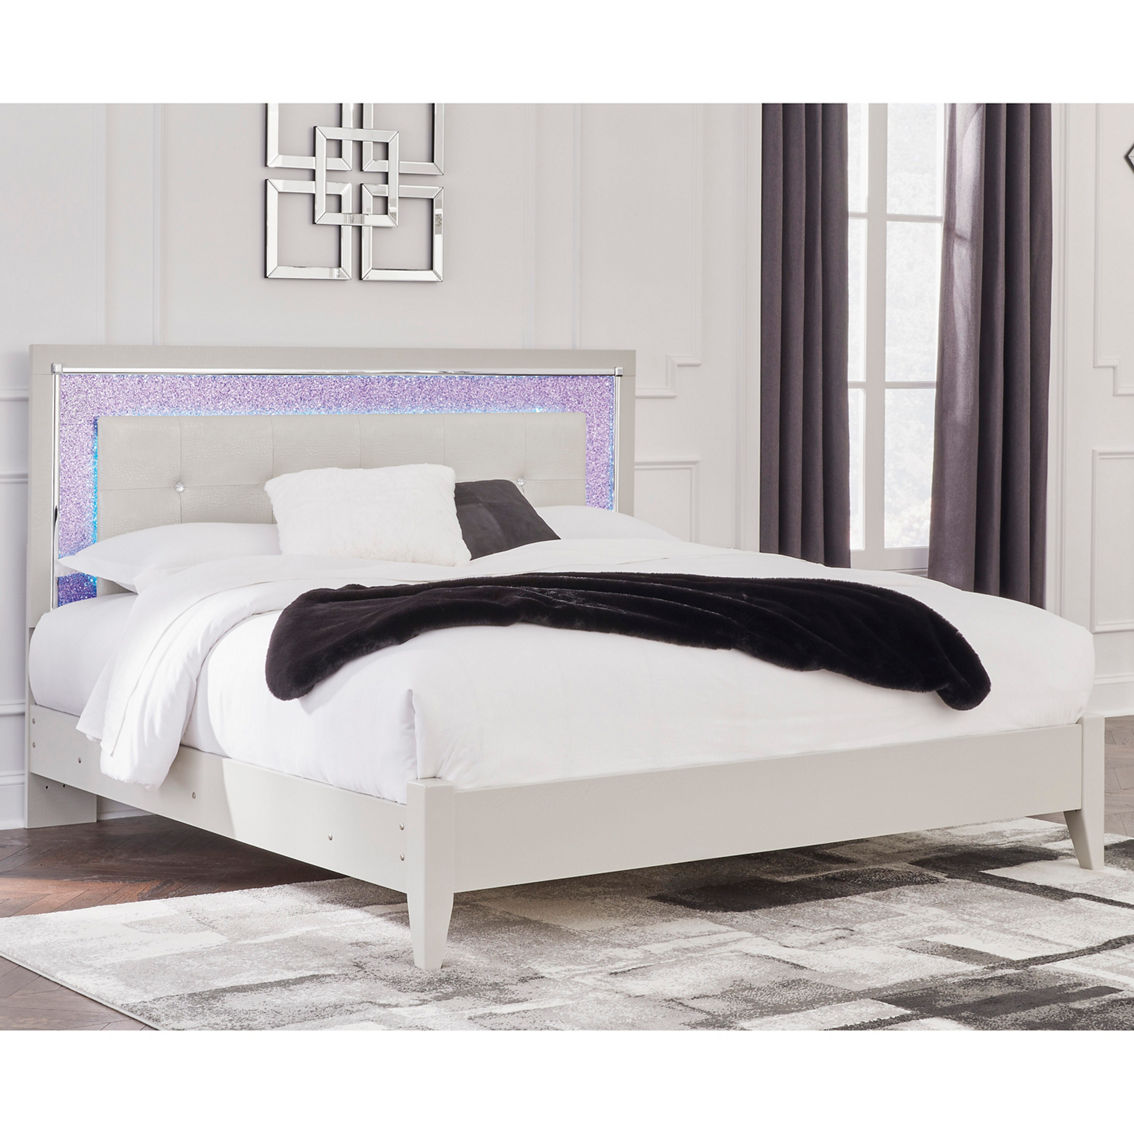 Signature Design by Ashley Zyniden 3 pc. Upholstered Bedroom Set - Image 2 of 8